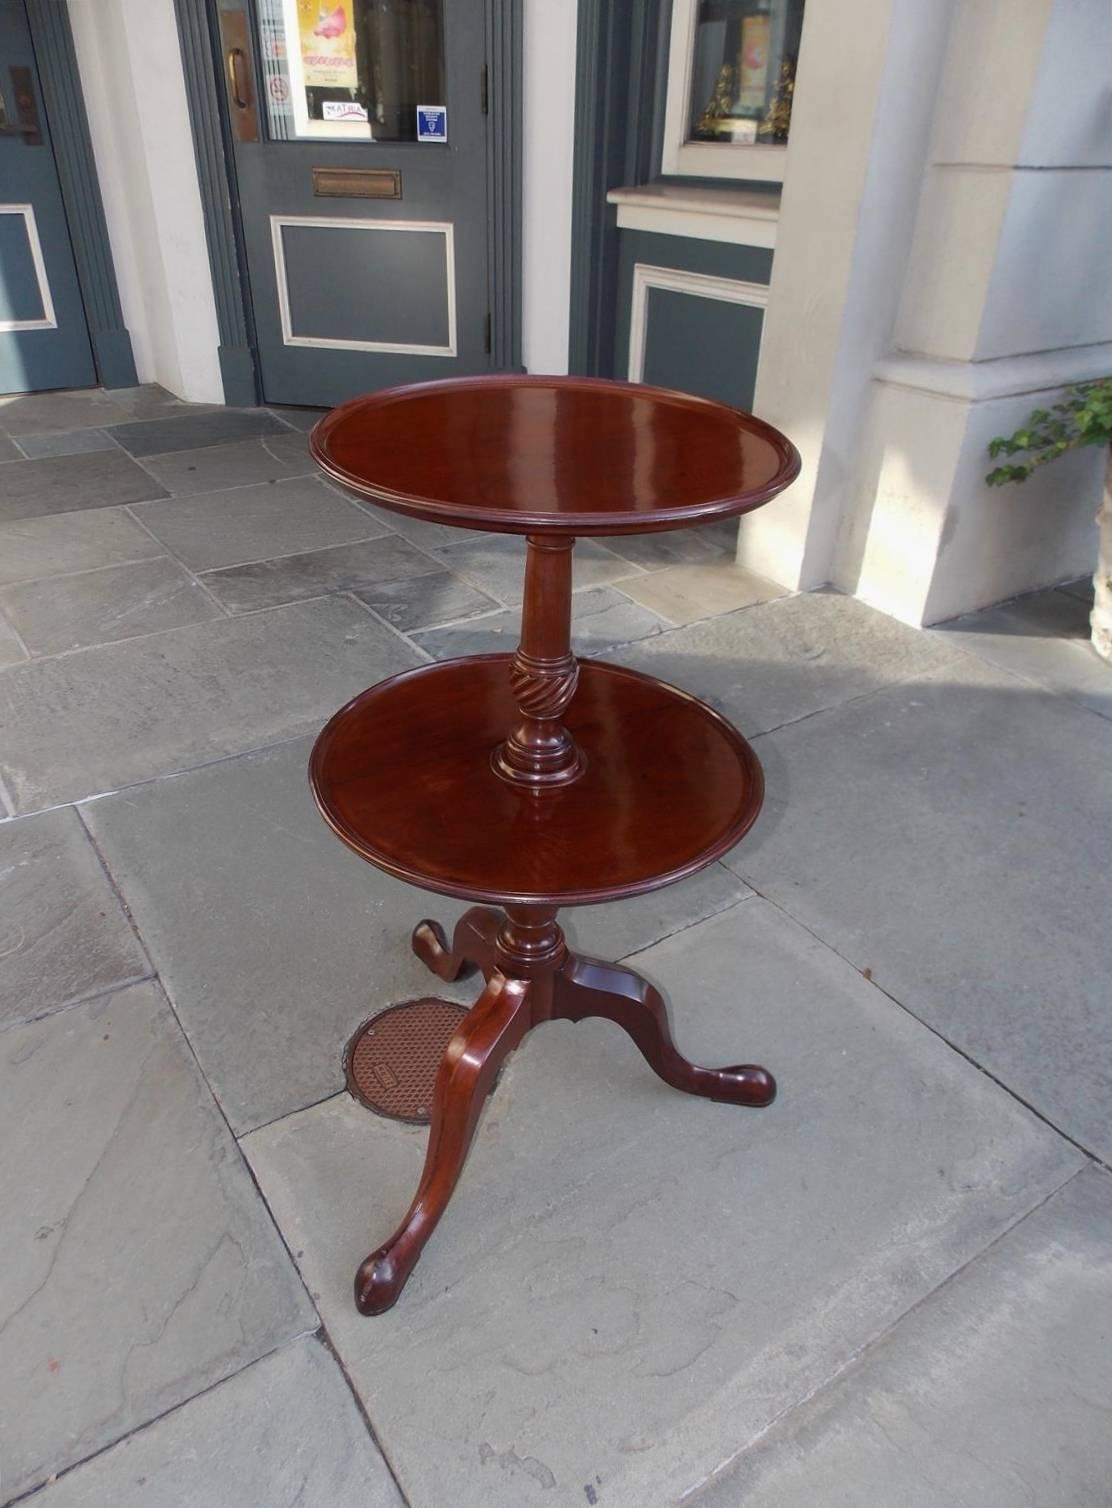 English Chippendale mahogany two-tiered dish top dumb waiter with a carved turned bulbous spiral centered column and terminating on tripod legs with stylized slipper feet, Late 18th century.